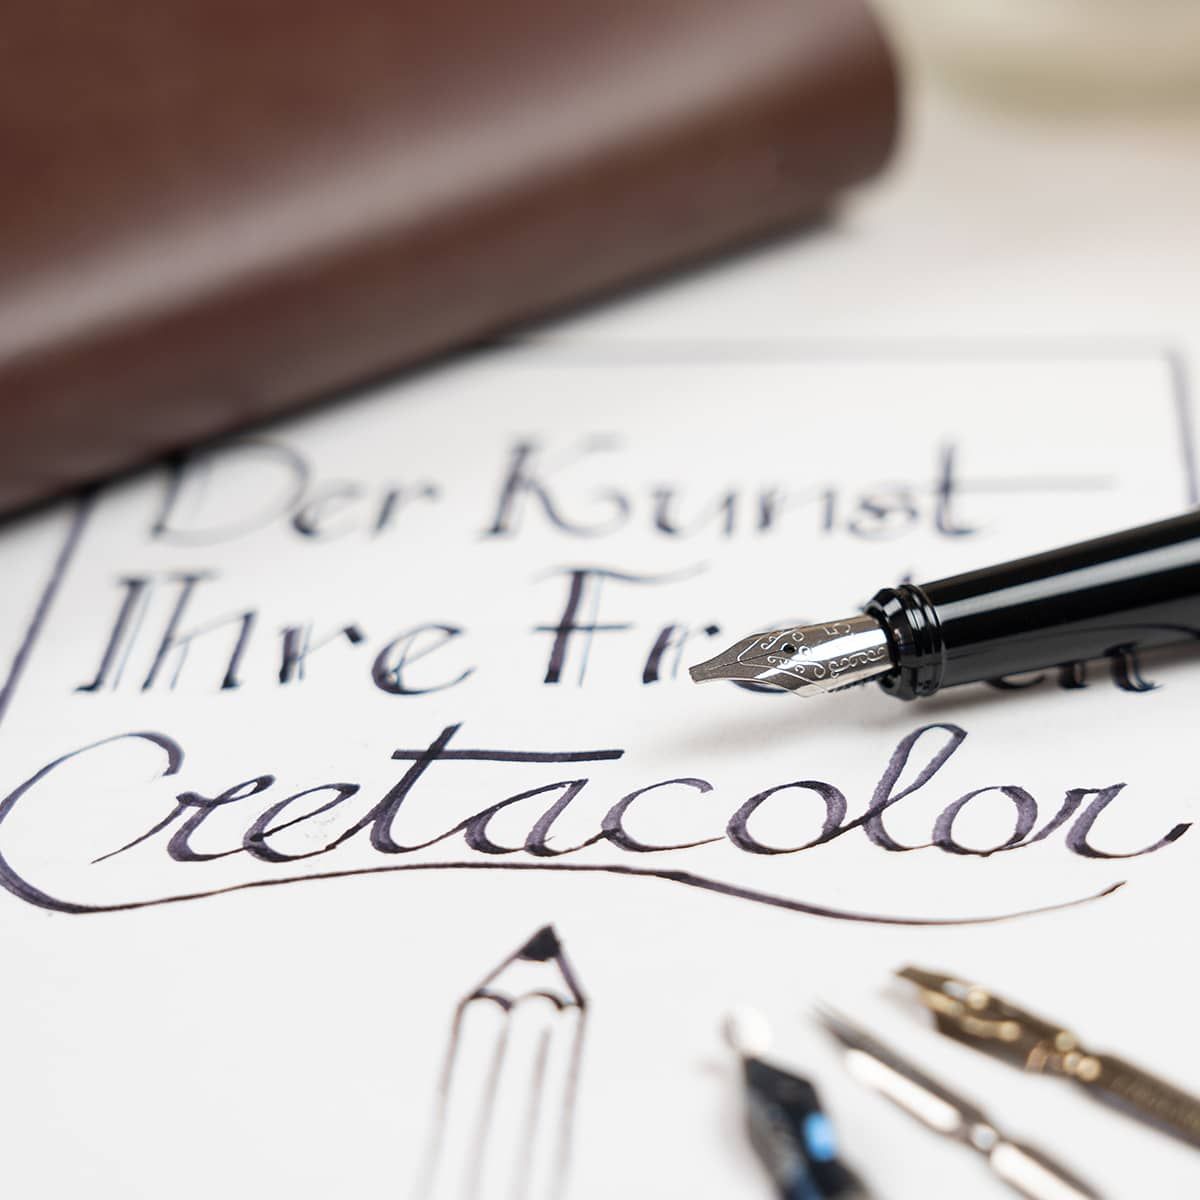 Add a flourish of beautiful handwriting to your invites and letters with this calligraphy handwriting set!